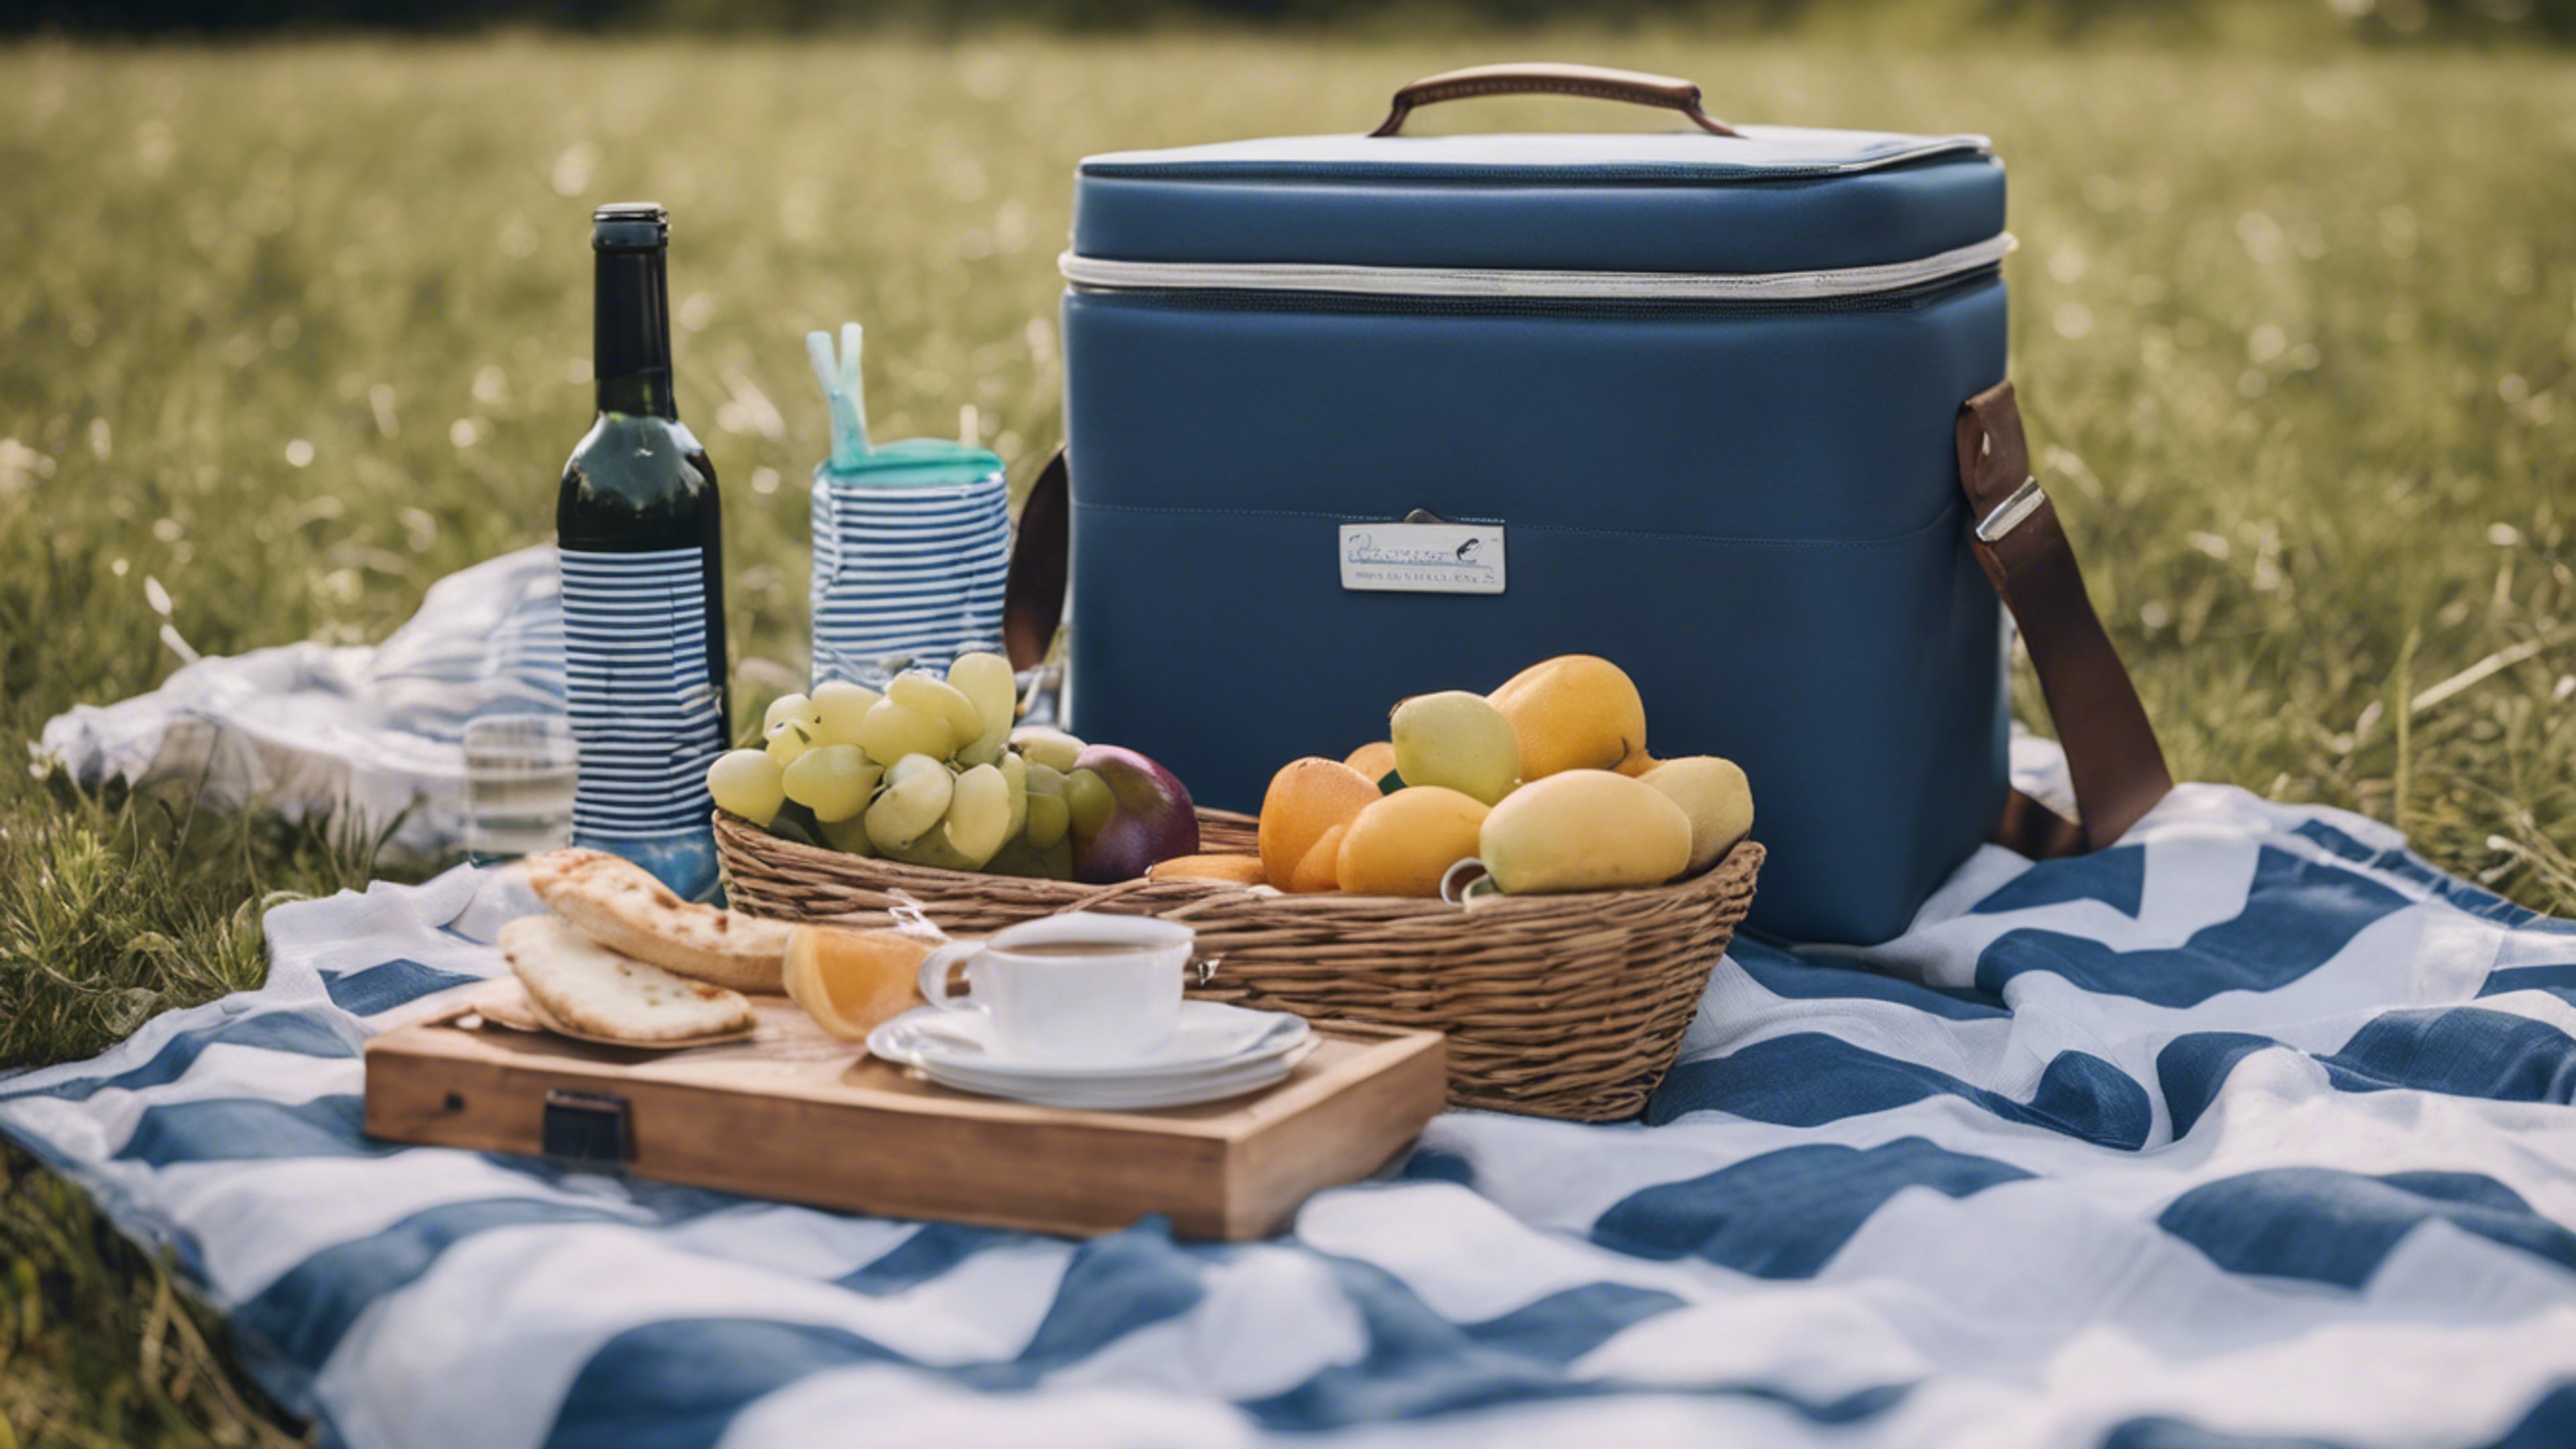 A preppy picnic setup in a grassy meadow, featuring a blue and white striped picnic blanket and matching cooler. Валлпапер[2c3aa7a20c924d6f9450]